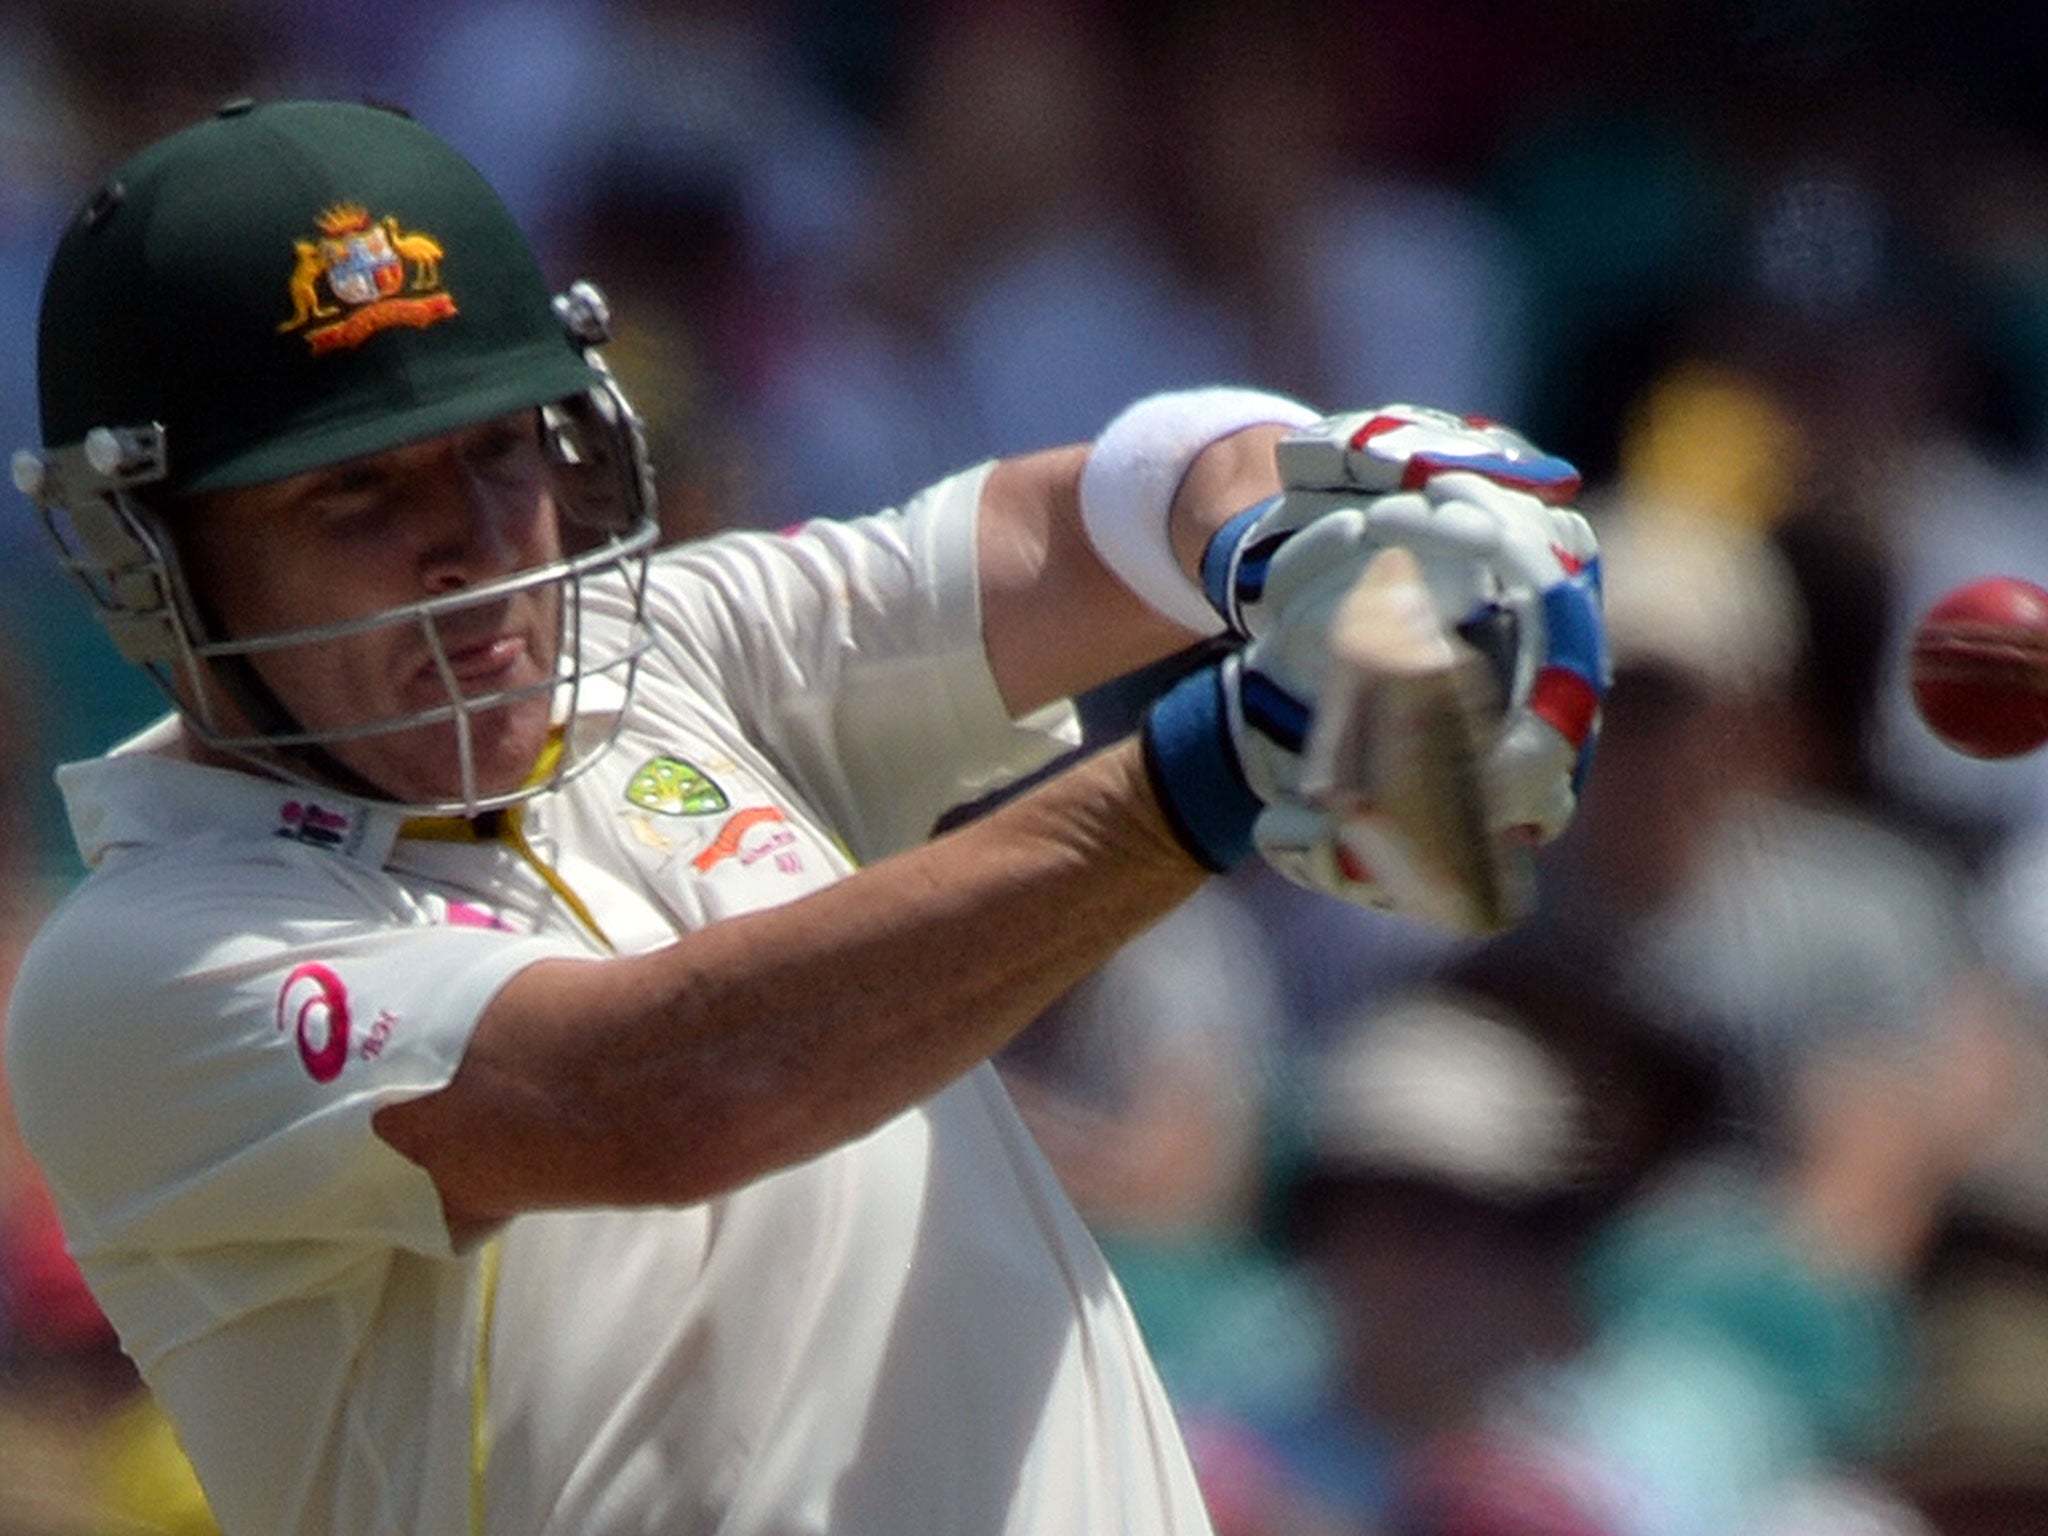 Australia wicket-keeper Brad Haddin scored yet another half-century as he hit 75 in the fifth and final Ashes Test against England